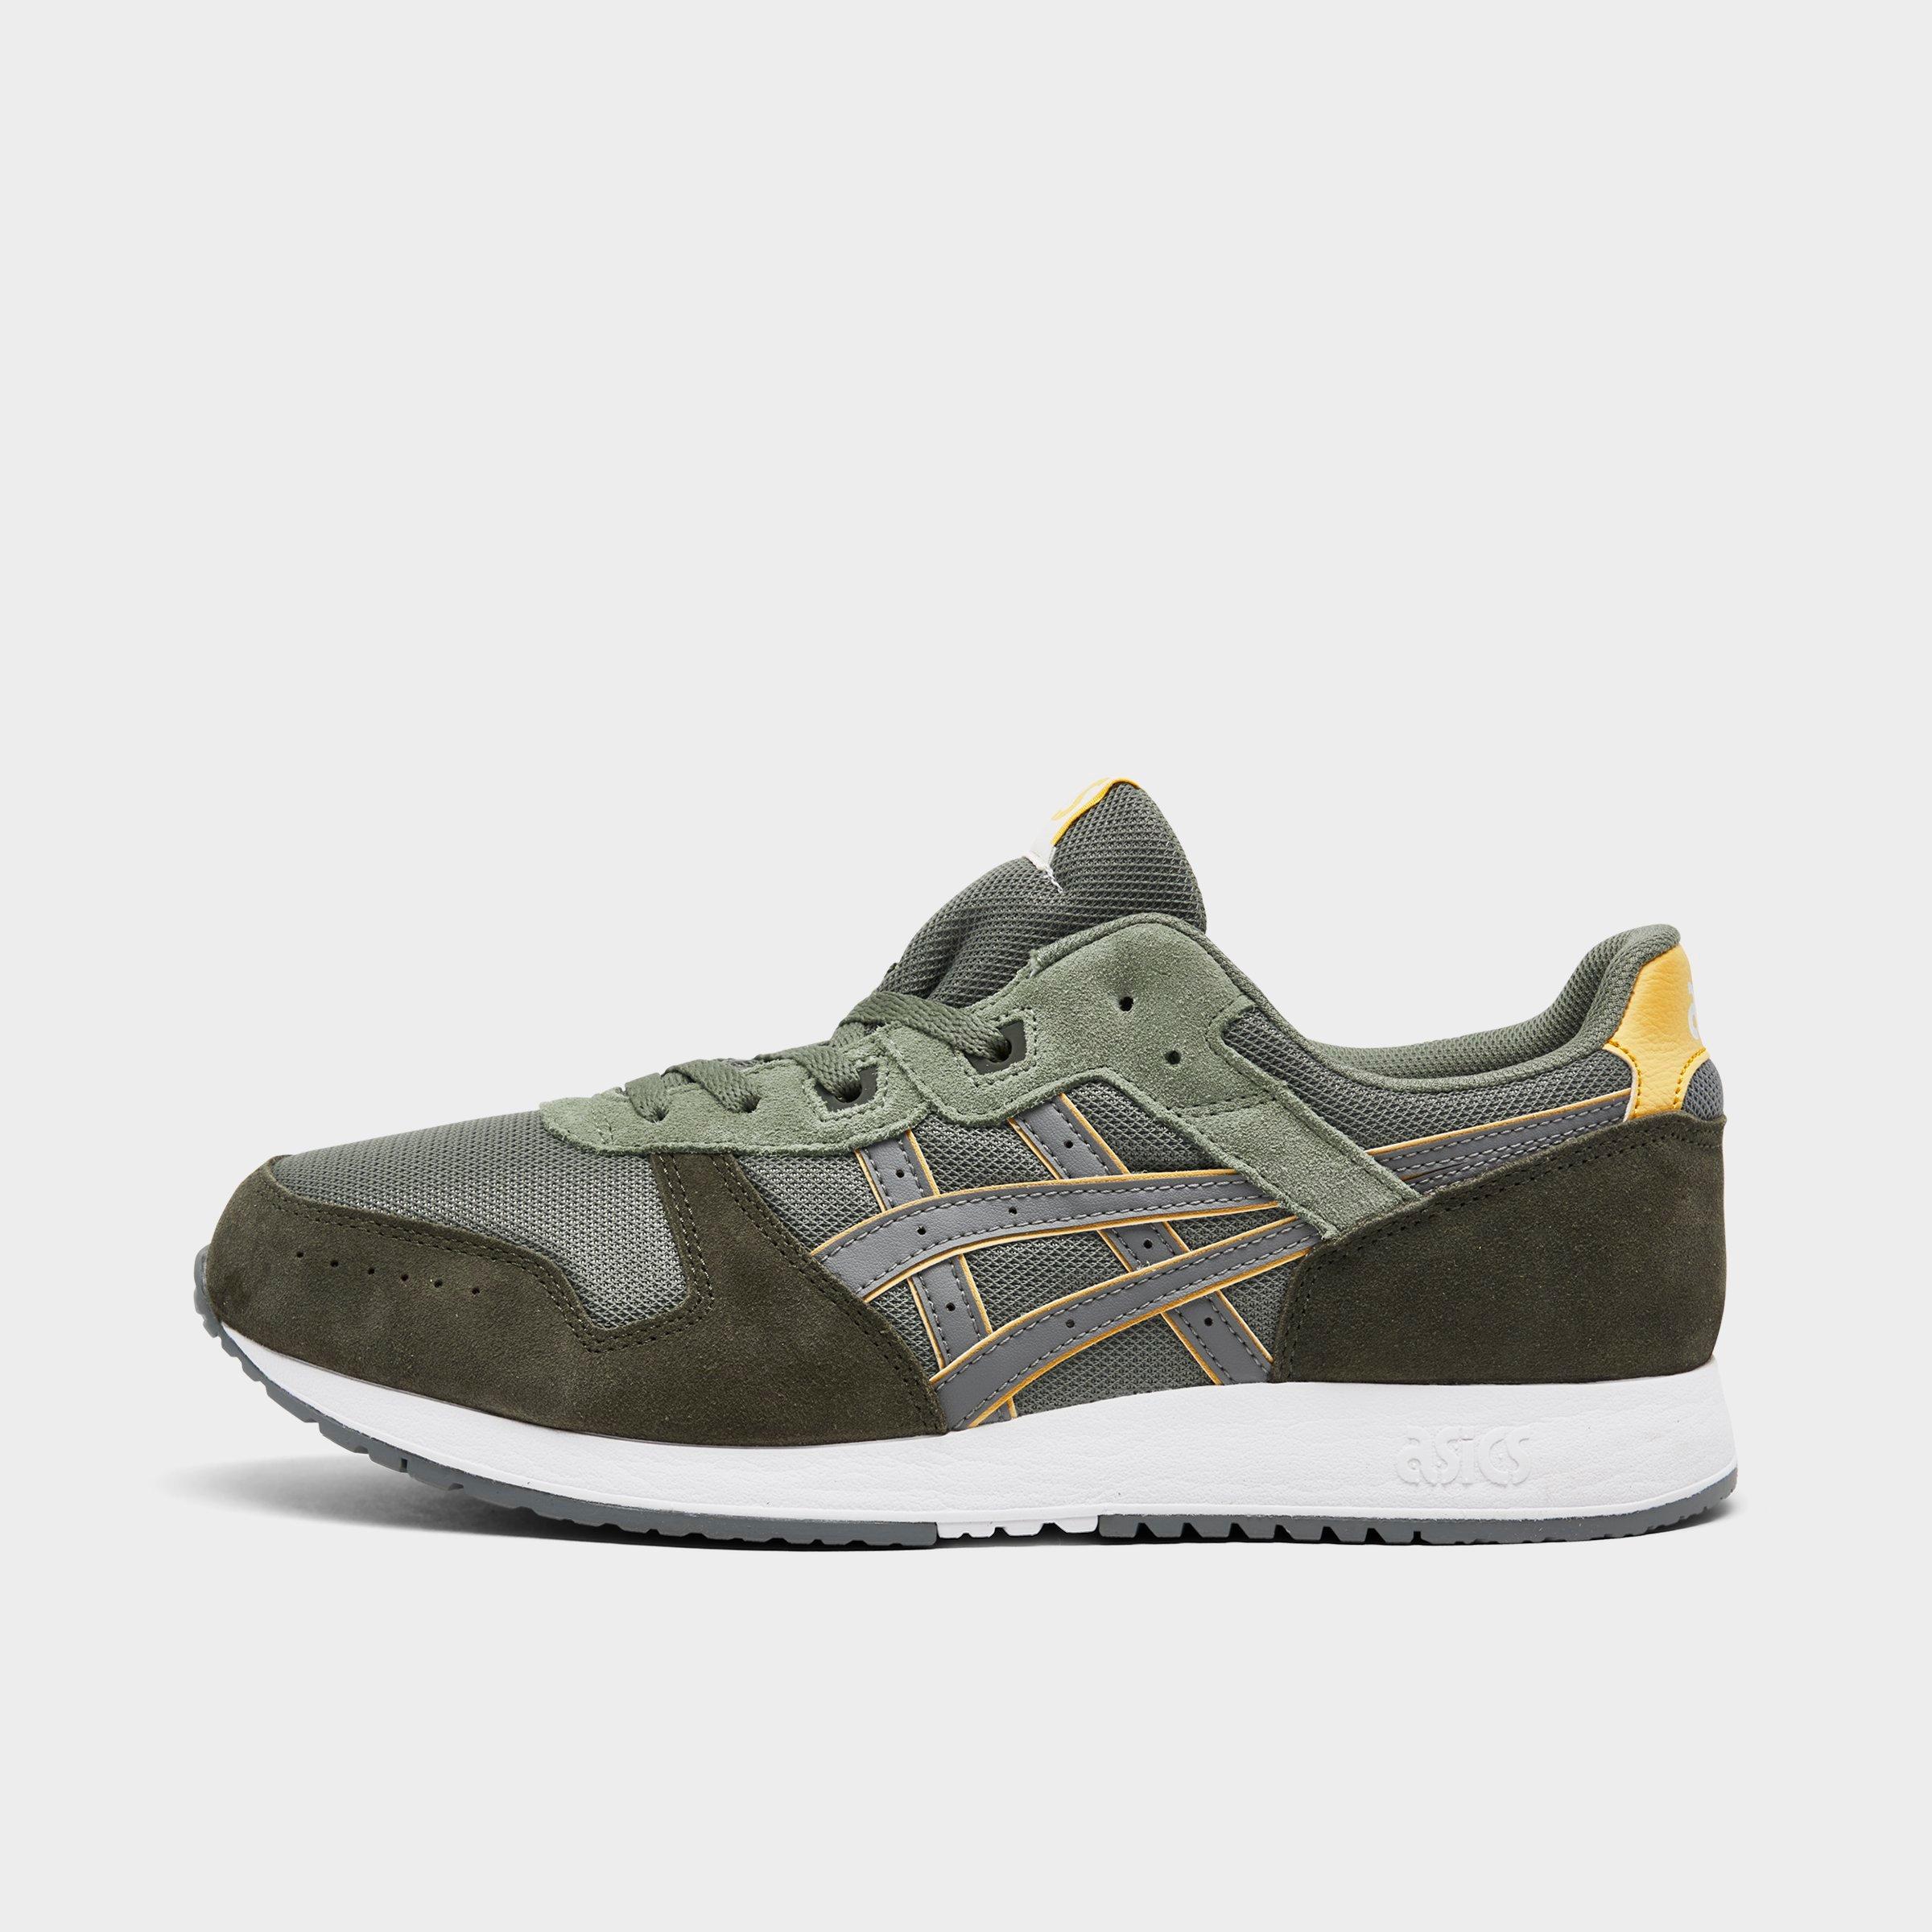 Asics Men's Gel-lyte Classic Casual Shoes In Lichen Green/clay Grey